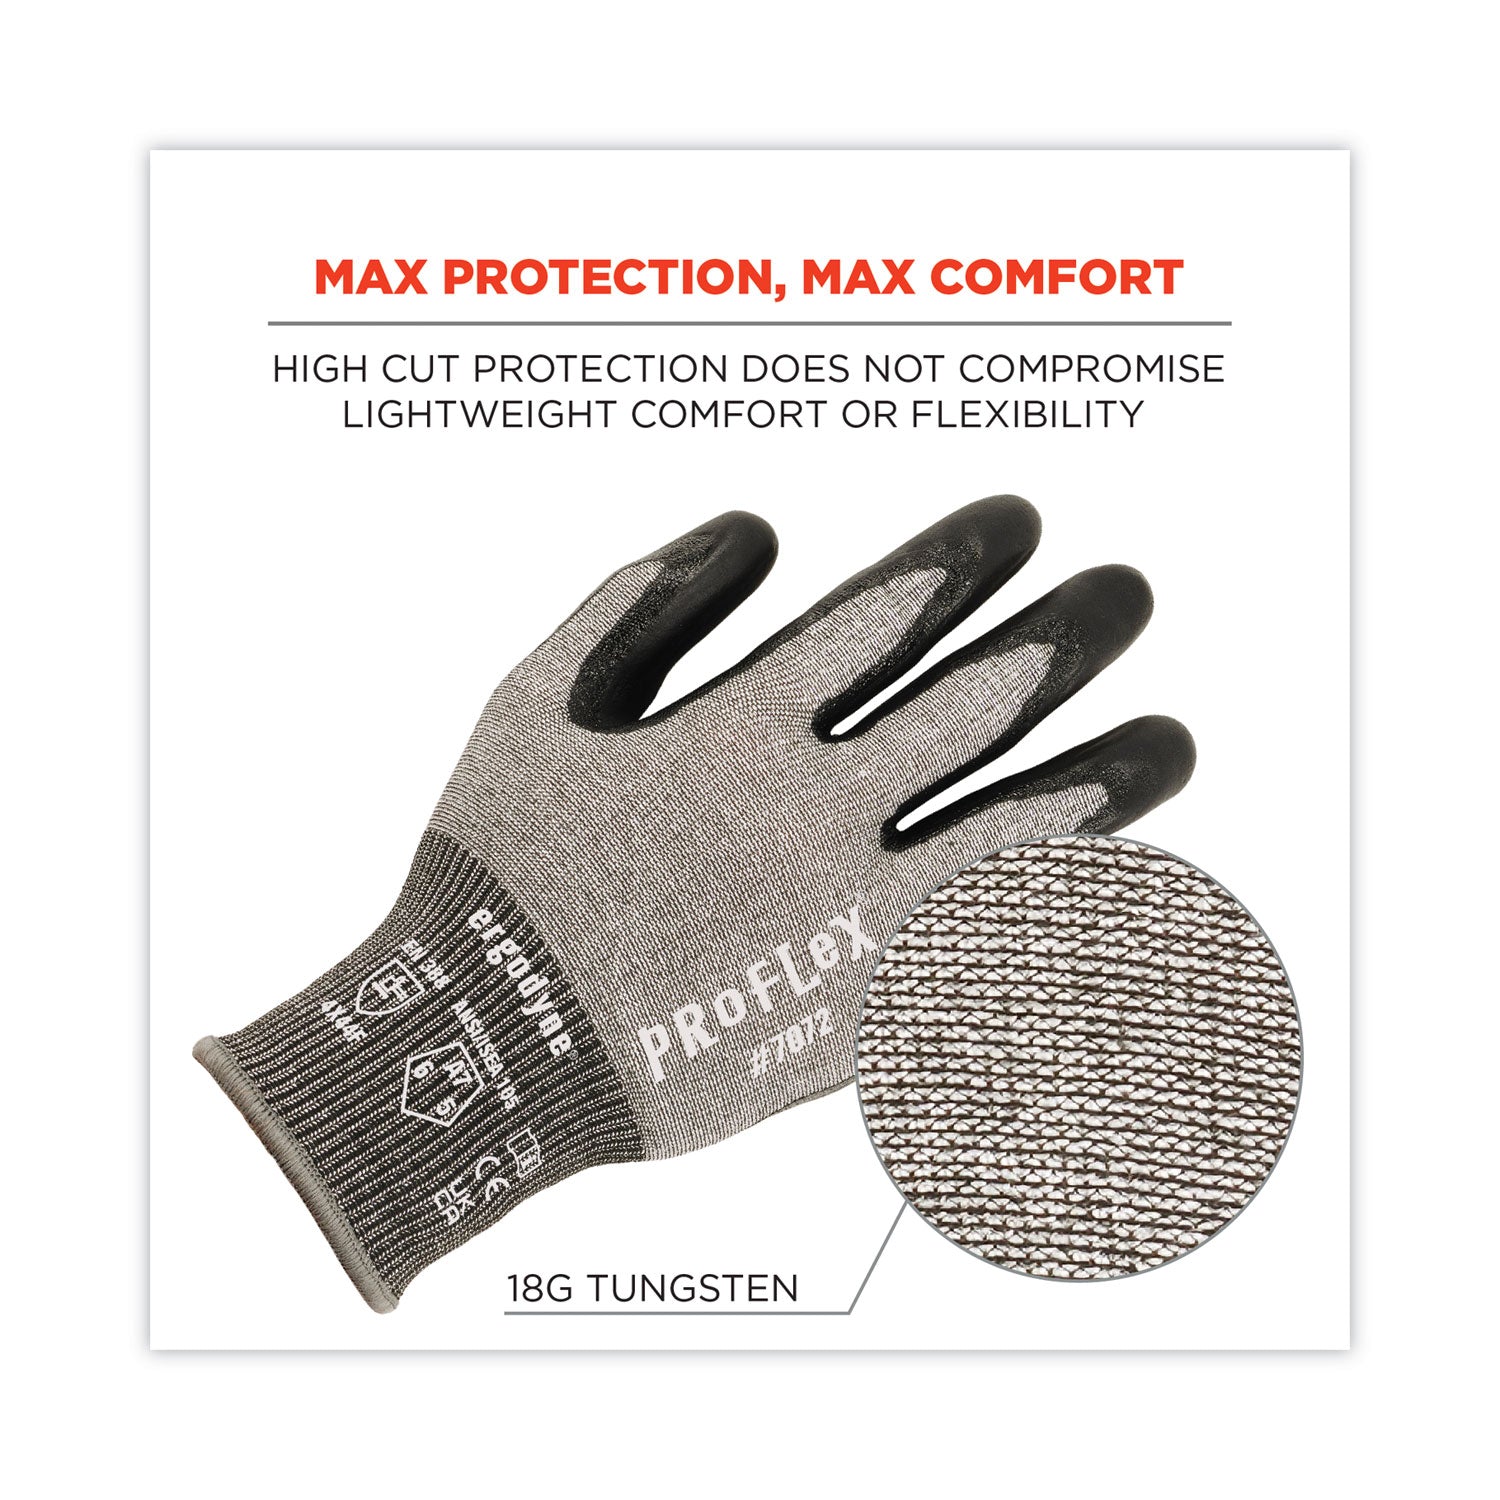 proflex-7072-ansi-a7-nitrile-coated-cr-gloves-gray-x-large-12-pairs-pack-ships-in-1-3-business-days_ego10305 - 7